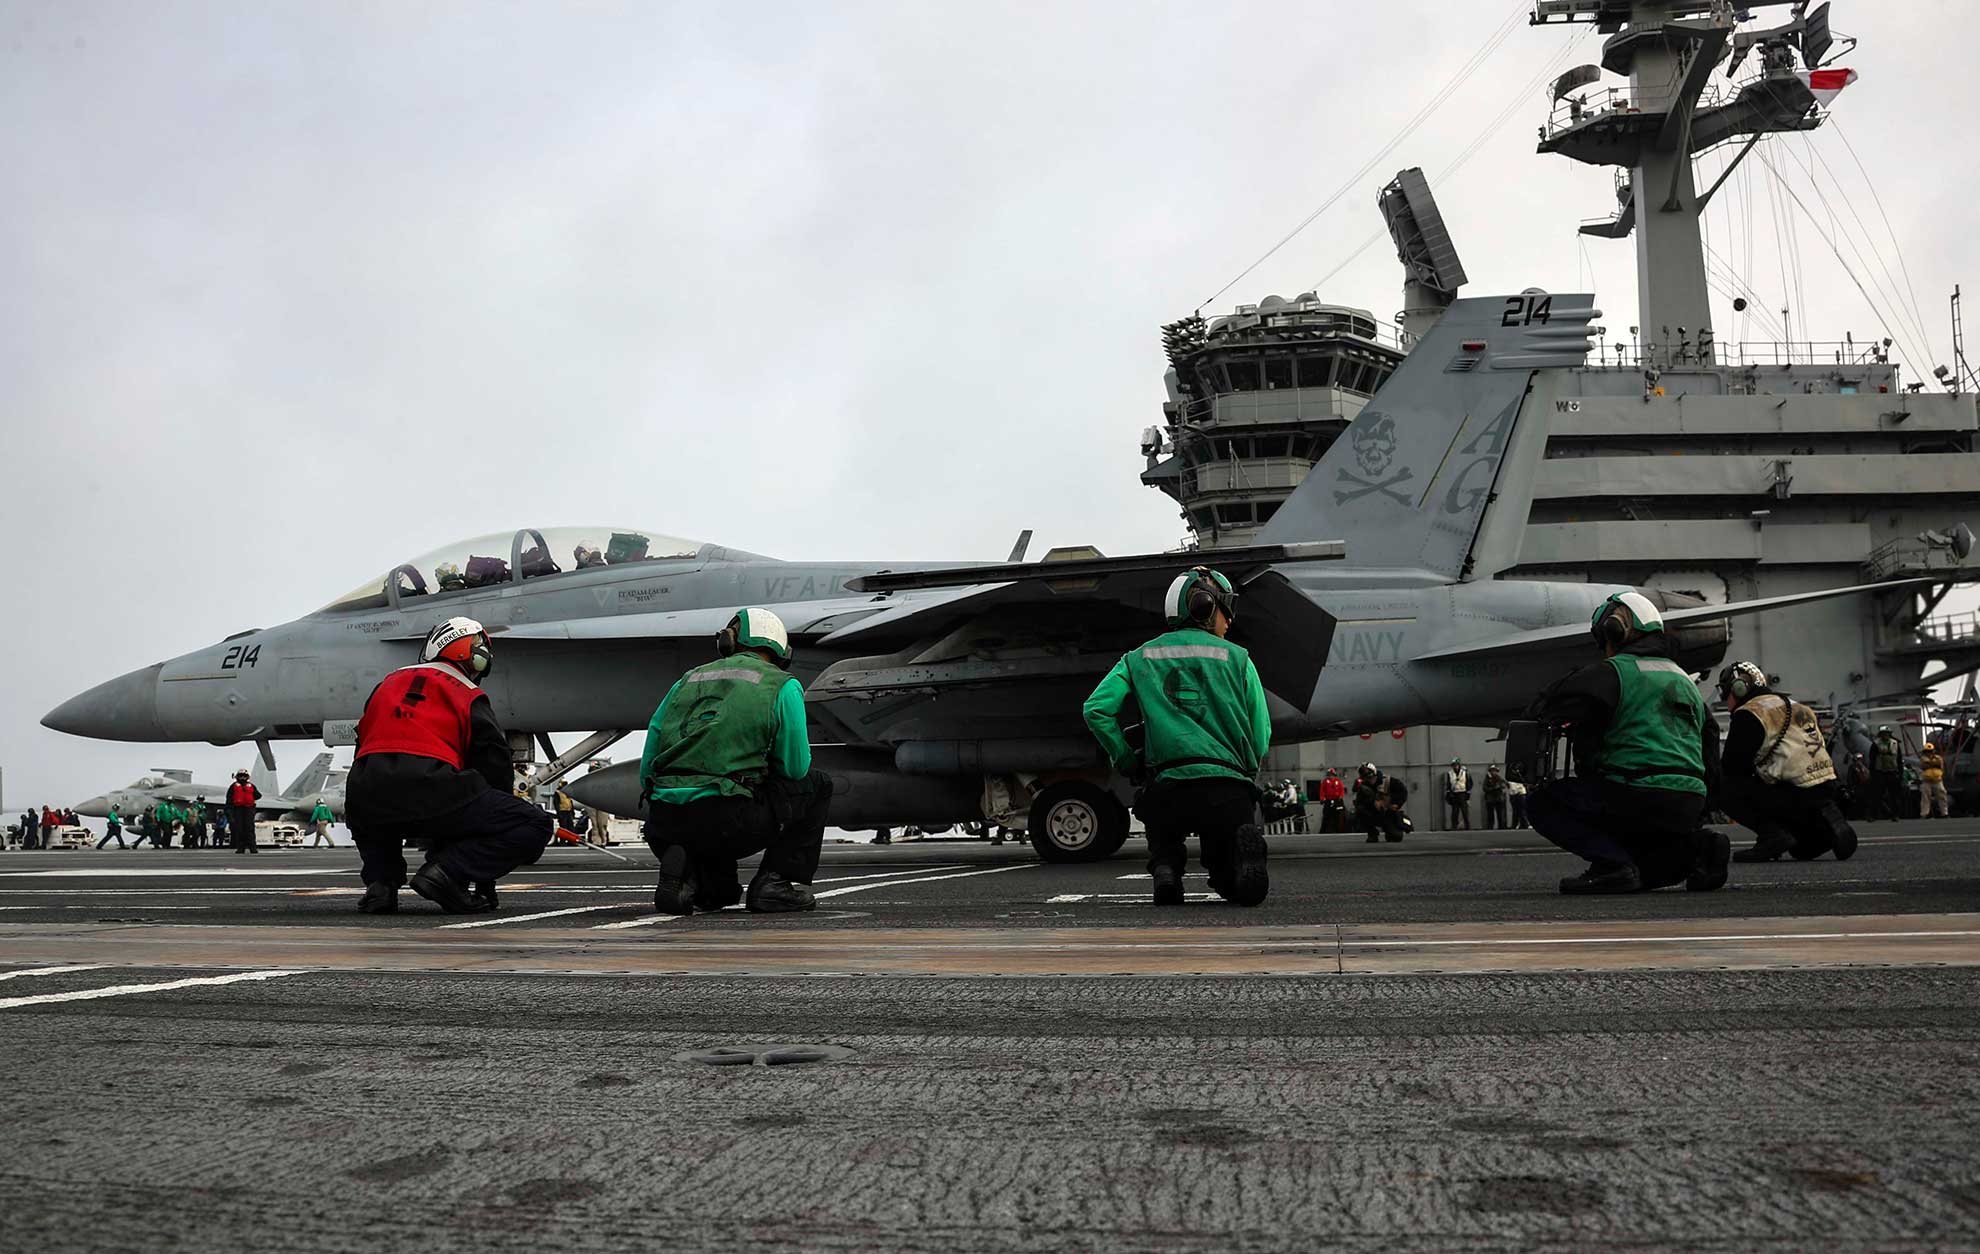 Mediterranean Sea (April 21, 2019) Sailors prepare an F/A-18F Super Hornet from the "Jolly Rogers" of Strike Fighter Squadron (VFA) 103 to launch from the flight deck of the Nimitz-class aircraft carrier USS Abraham Lincoln (CVN 72). Abraham Lincoln is deployed as part of the Abraham Lincoln Carrier Strike Group in support of maritime security cooperation efforts in the U.S. 5th, U.S. 6th and U.S. 7th Fleet areas of operation. With Abraham Lincoln as the flagship, deployed strike group assets include staffs, ships and aircraft of Carrier Strike Group (CSG) 12, Destroyer Squadron (DESRON) 2 and Carrier Air Wing (CVW) 7; as well as the Spanish navy Alvaro de Bazan-class frigate ESPS Mendez Nuñez (F 104) -- U.S. Navy photo by MCS 3rd Class Jeff Sherman. -